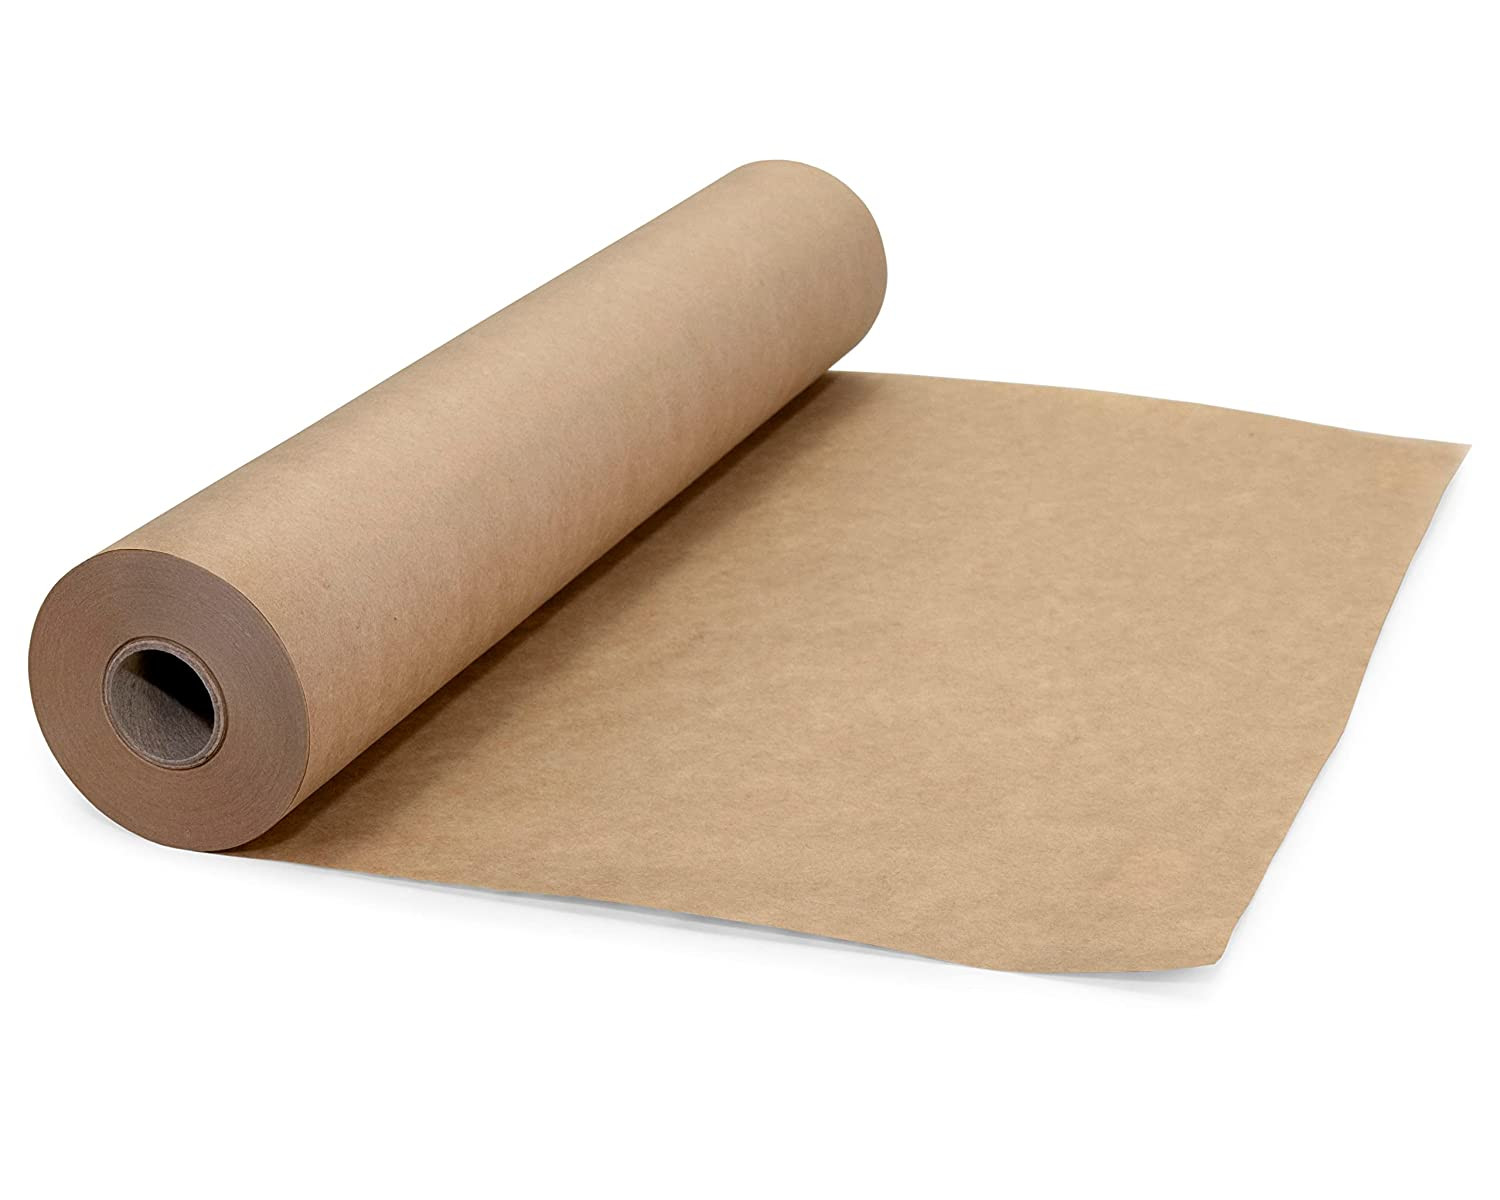 18 x 60 yards Premium Green Painters Masking Paper for Oil-based  Applications, Natural Kraft buy in stock in U.S. in IDL Packaging